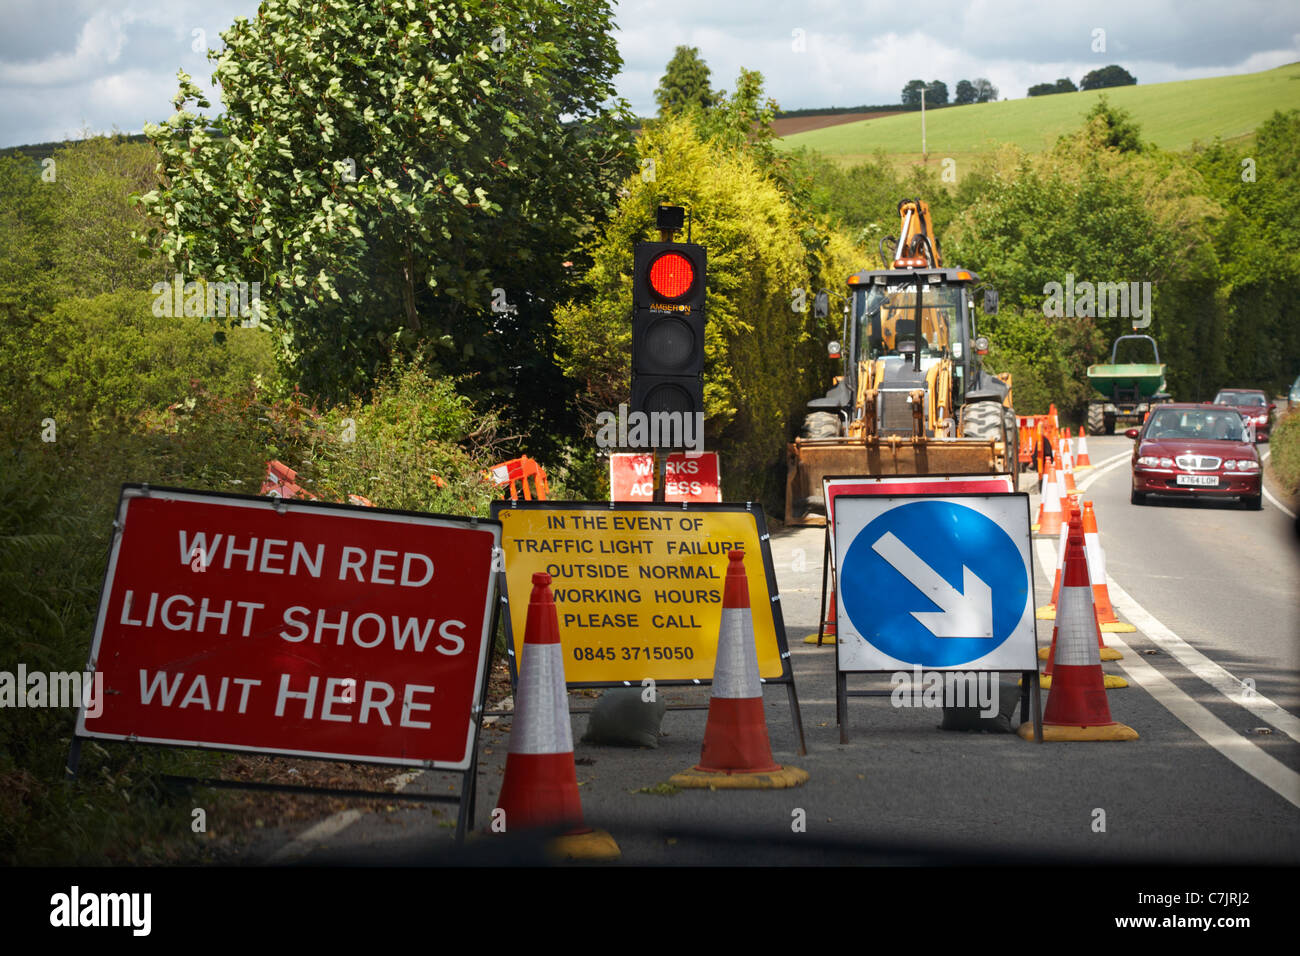 Waiting in car looking out of windscreen at red light traffic signals at roadworks and oncoming vehicles Stock Photo